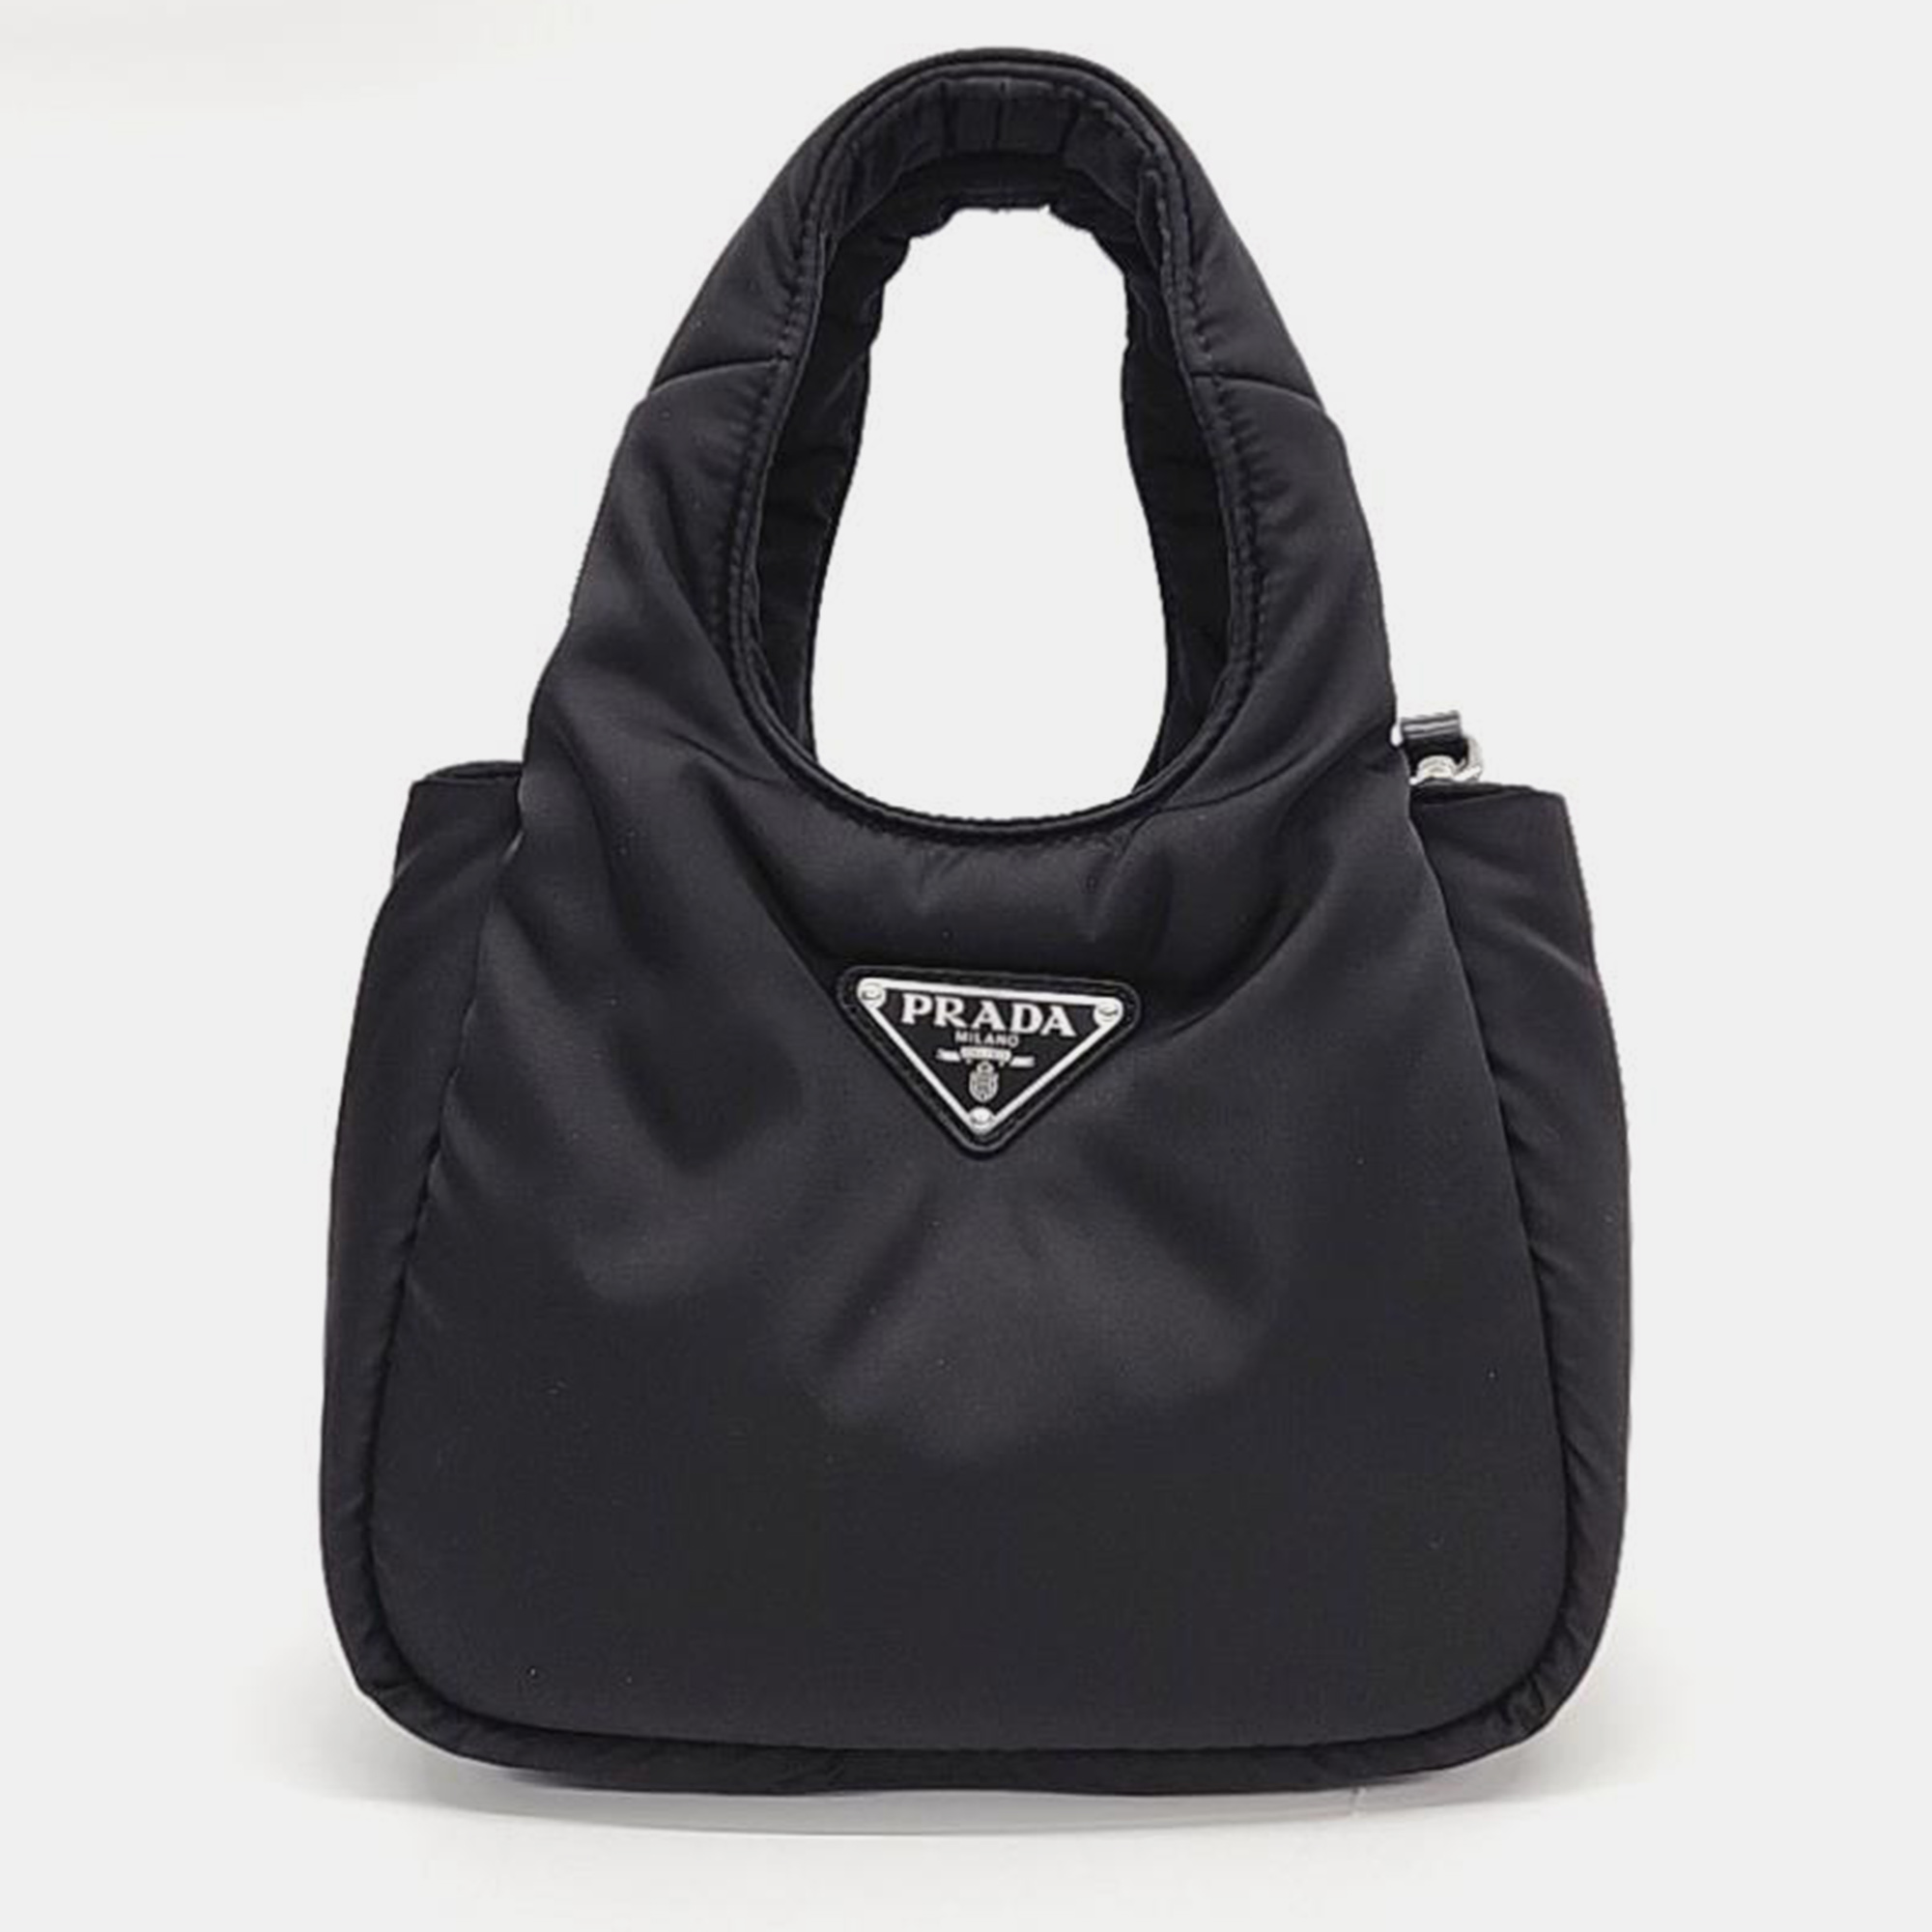 Elevate your every day with this Prada tote. Meticulously designed it seamlessly blends functionality with luxury offering the perfect accessory to showcase your discerning style while effortlessly carrying your essentials.